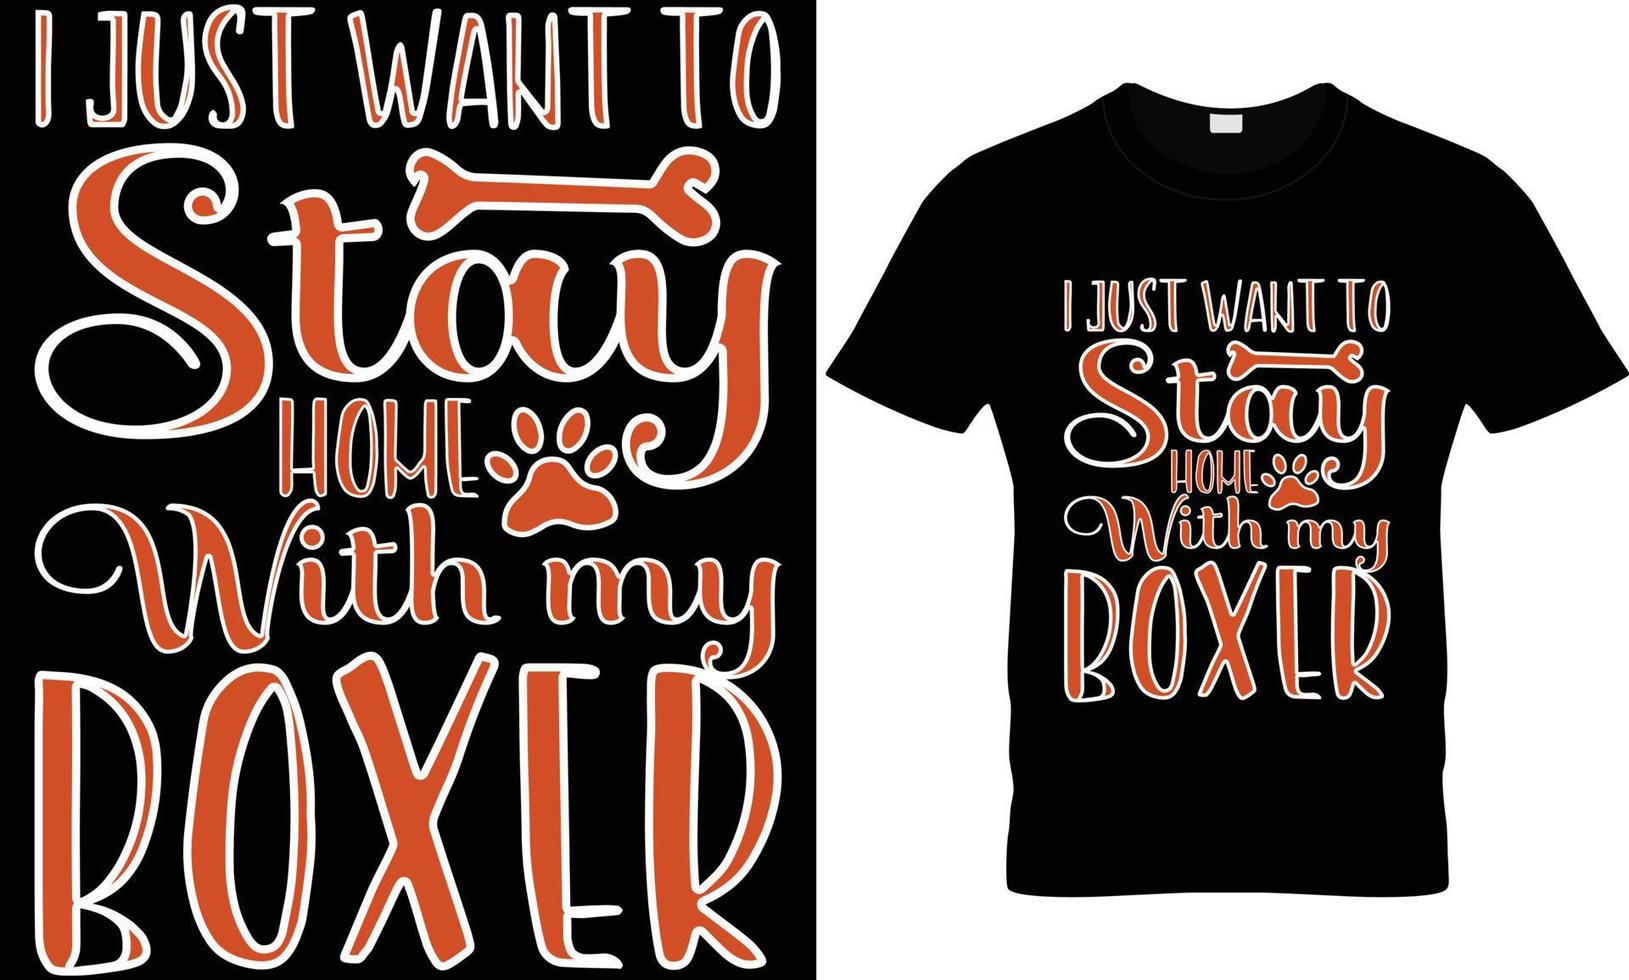 i just want to stay home with my boxer t shirt design vector